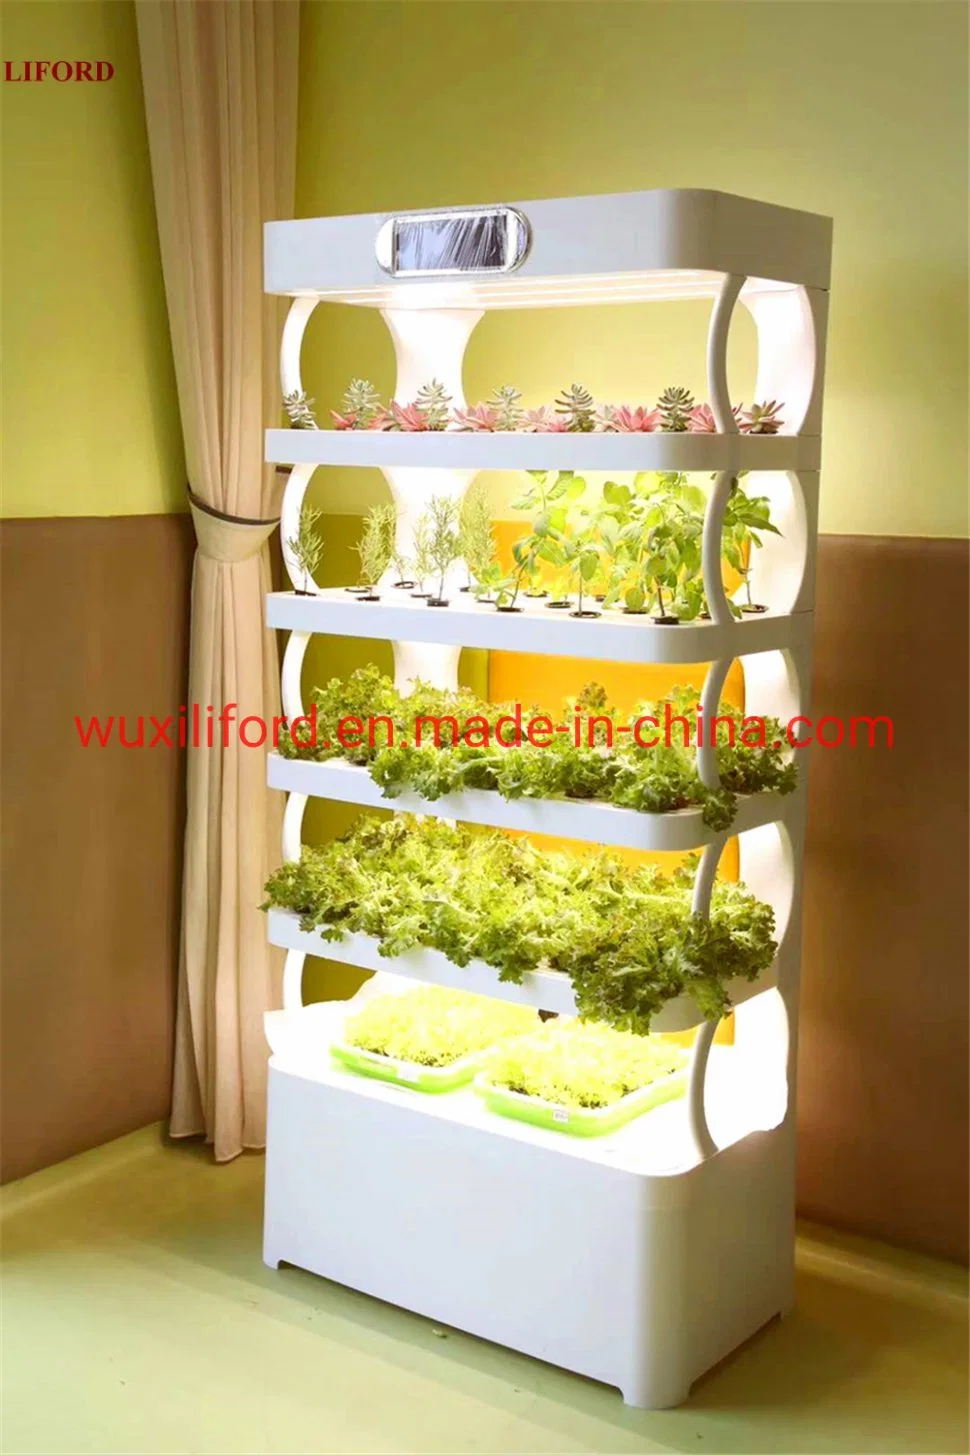 Indoor Hydroponics Growing System Vertical Farming Supplier in China